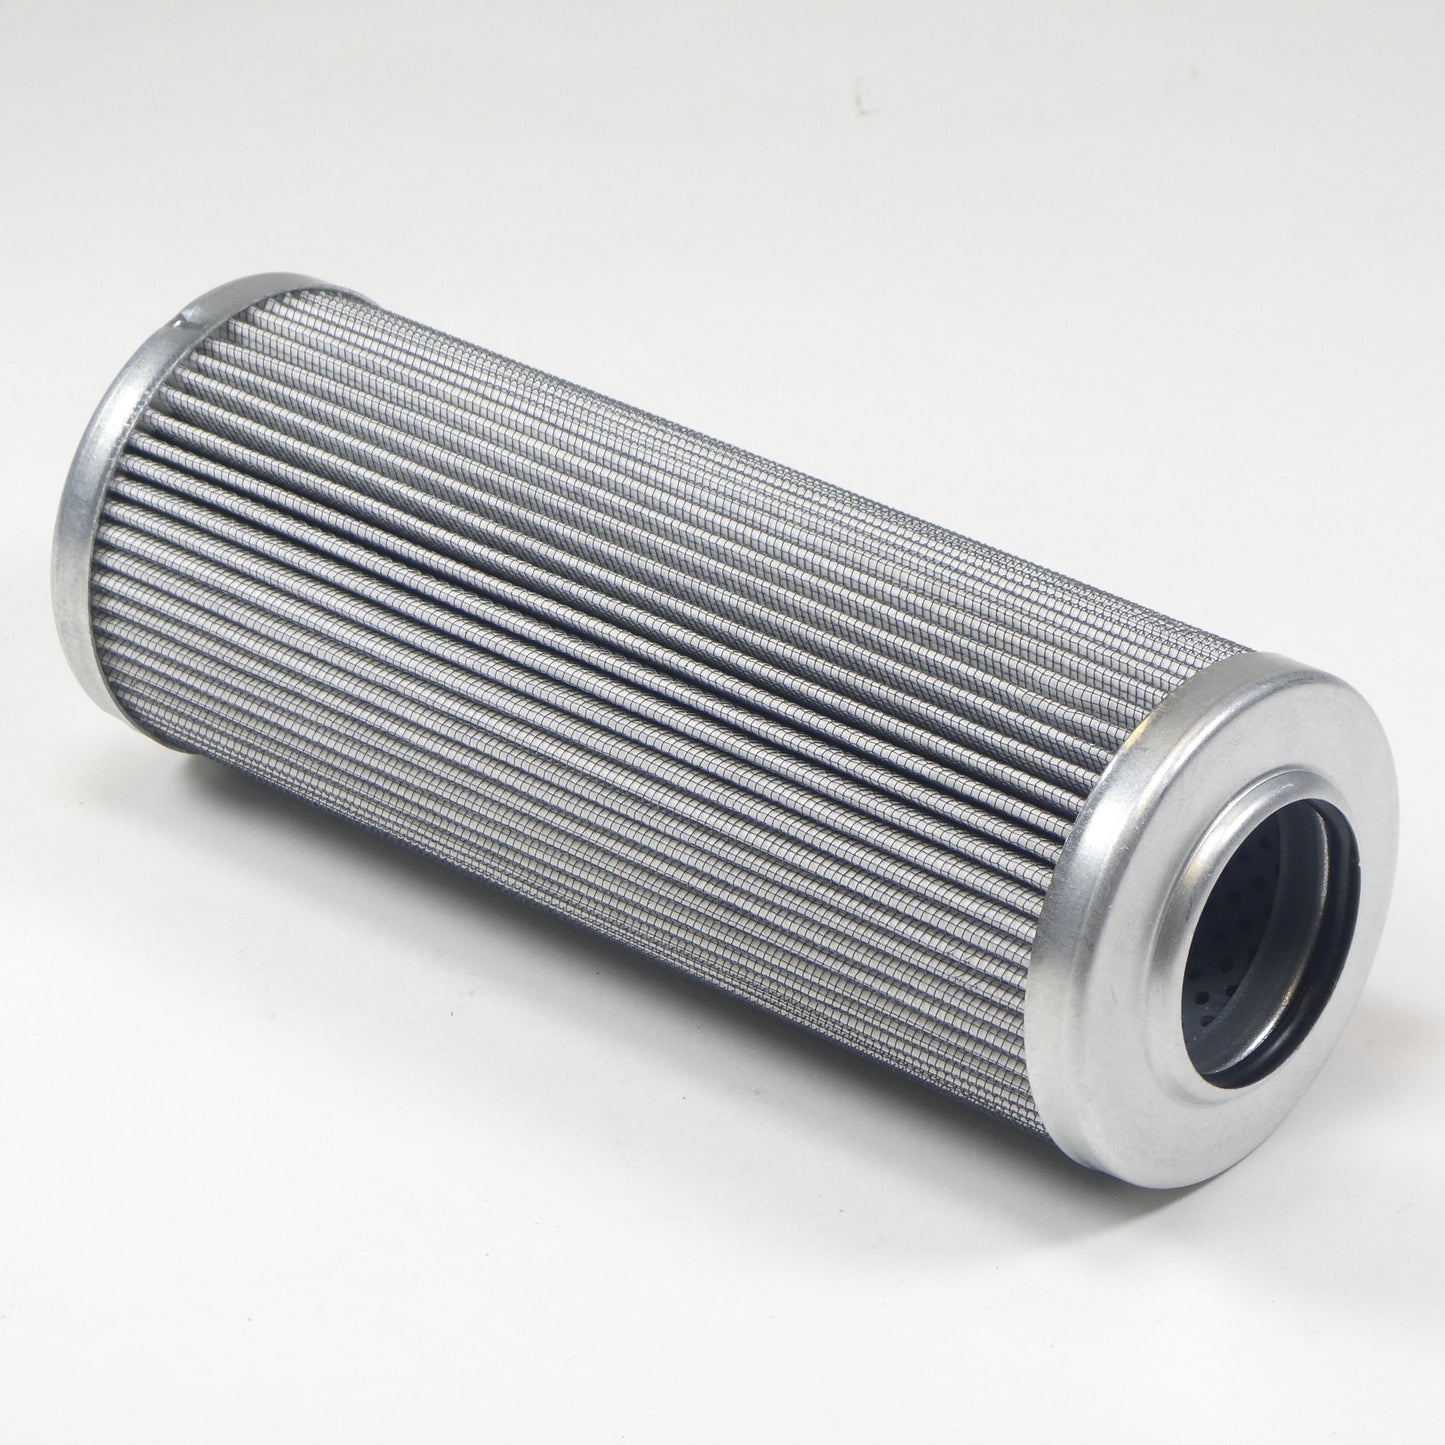 Hydrafil Replacement Filter Element for Fram FD141G06A